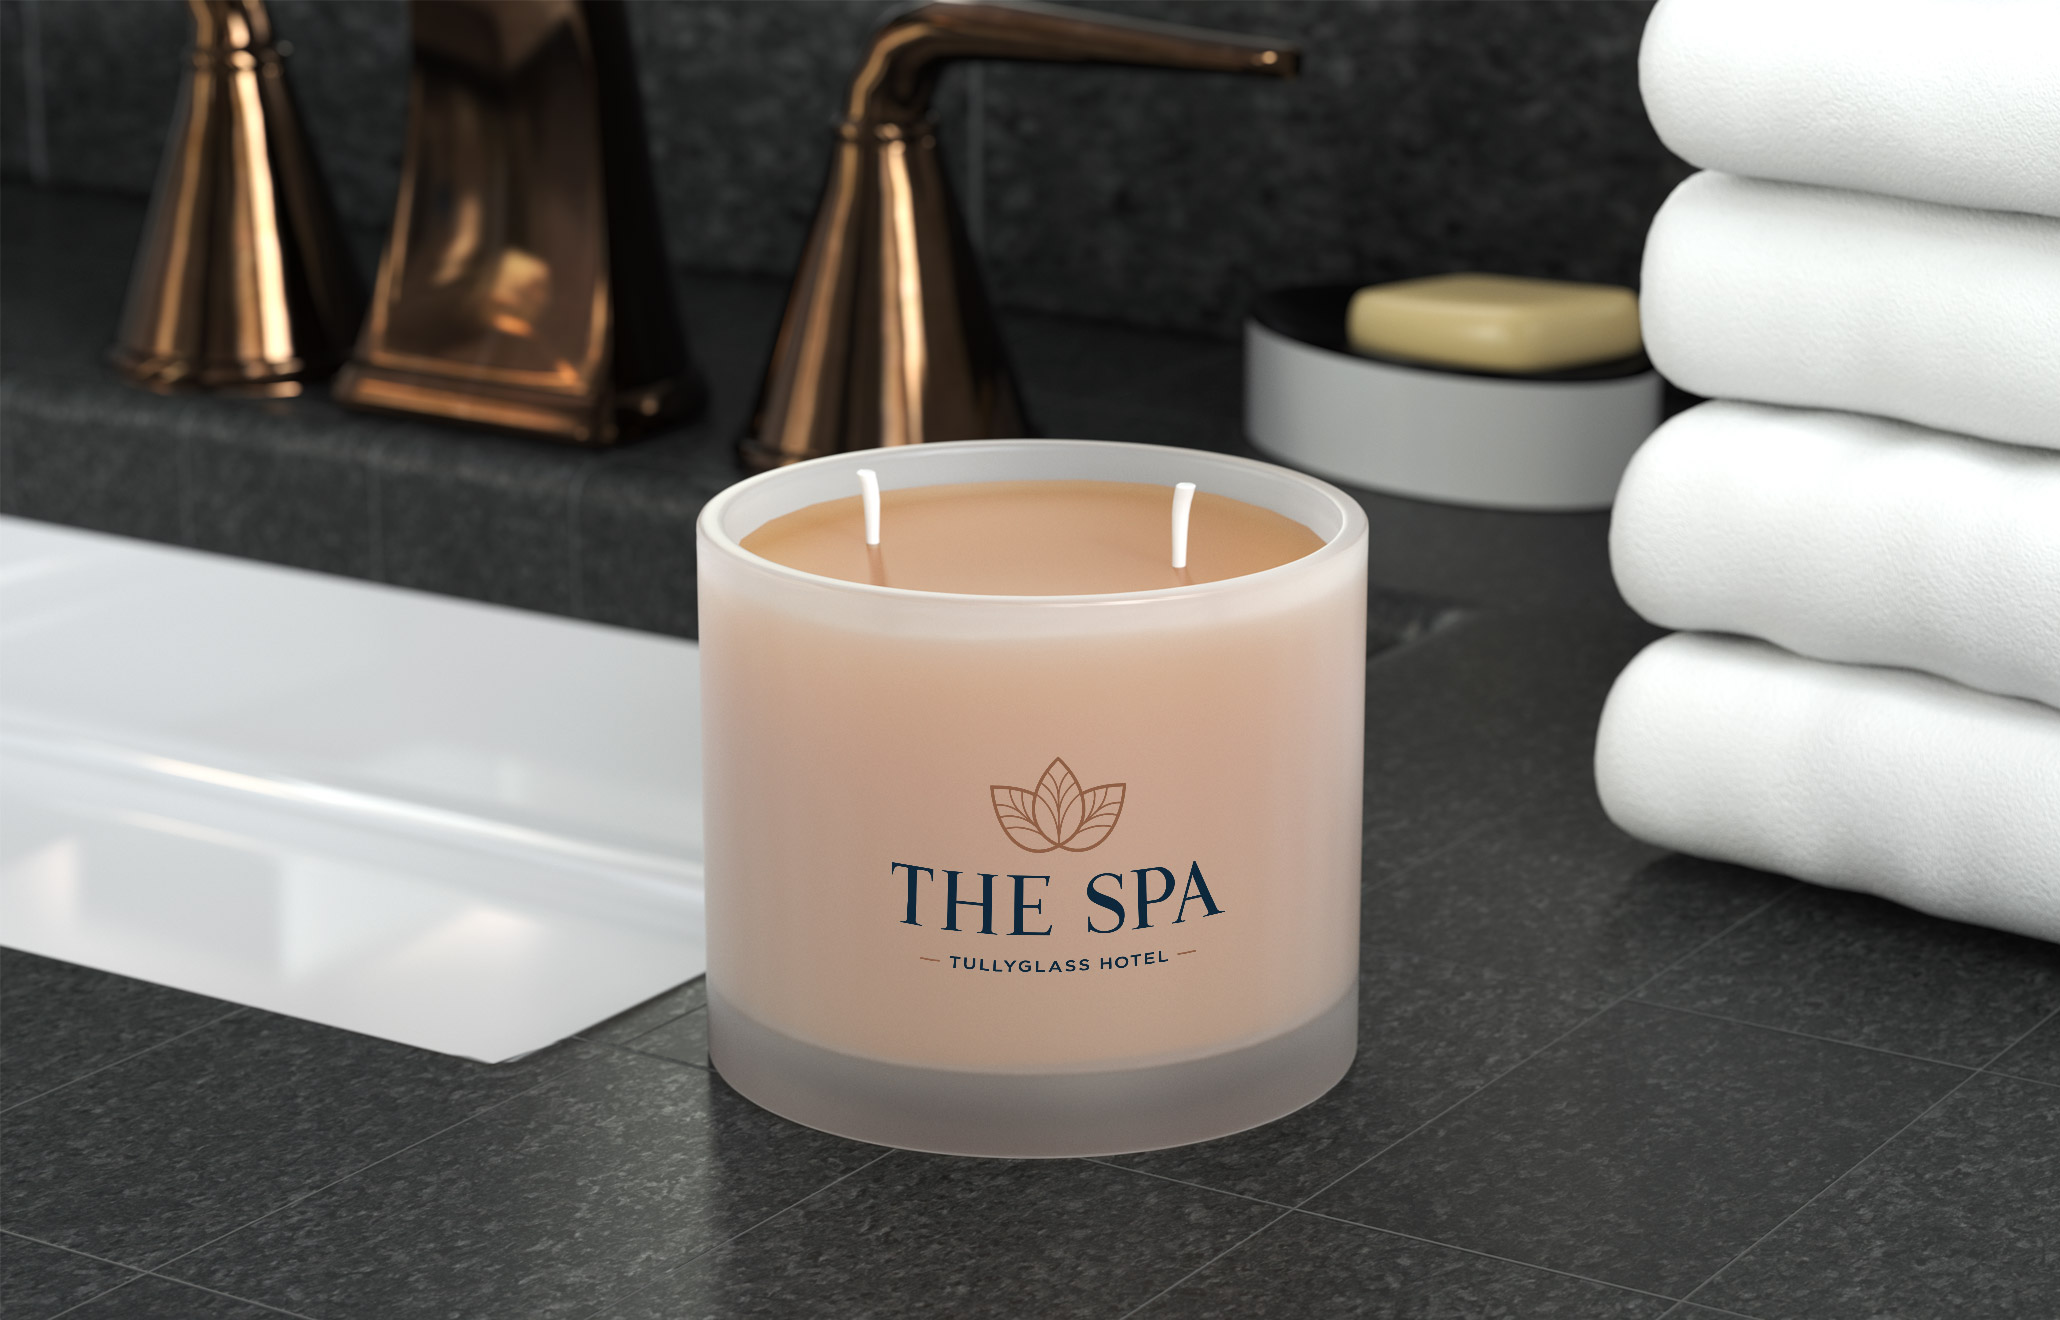 The Spa - Tullyglass Hotel